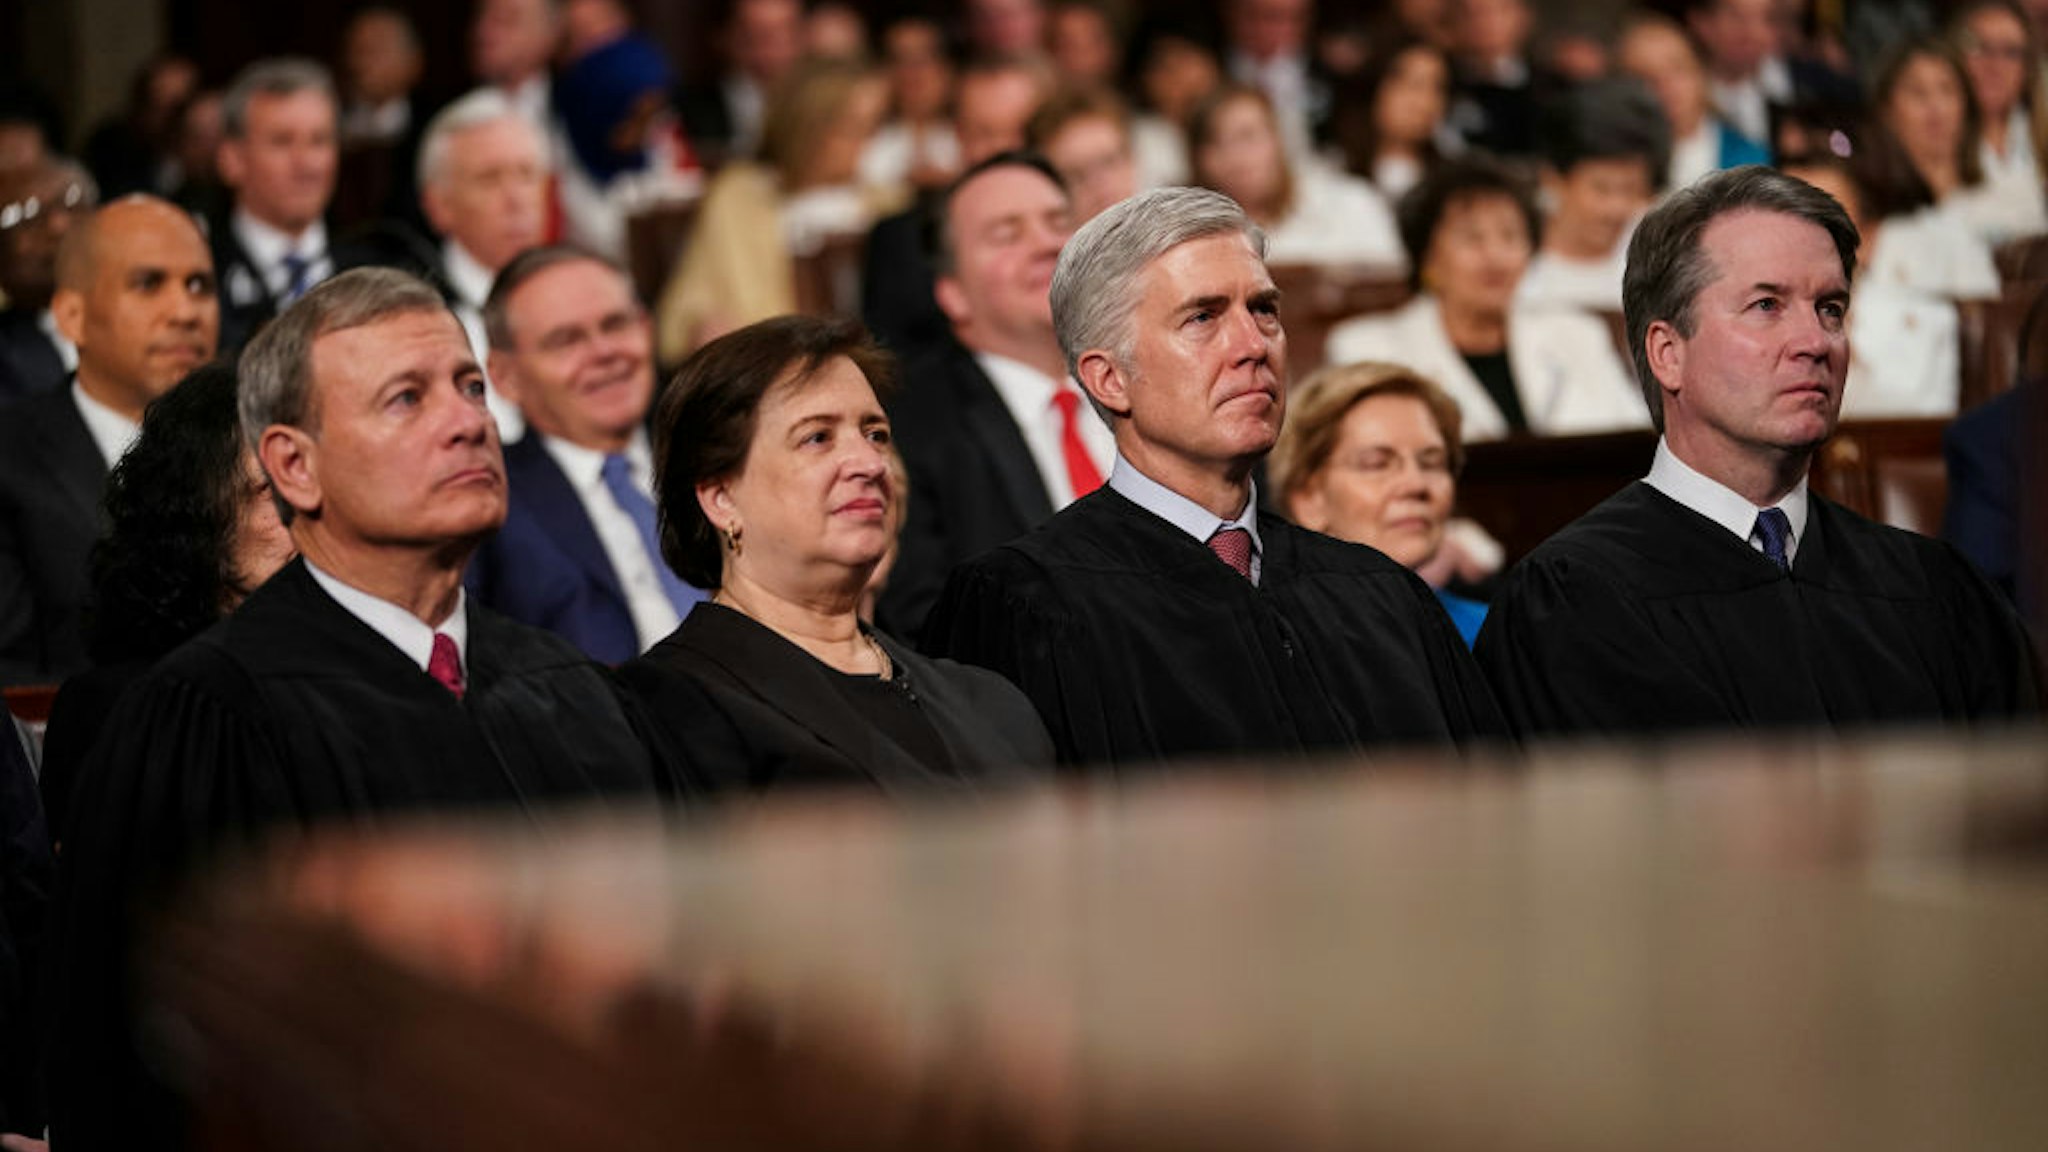 Supreme Court Justices John Roberts, Elena Kagan, Neil Gorsuch and Brett Kavanaugh attend the State of the Union address in the chamber of the U.S. House of Representatives at the U.S. Capitol Building on February 5, 2019 in Washington, DC.